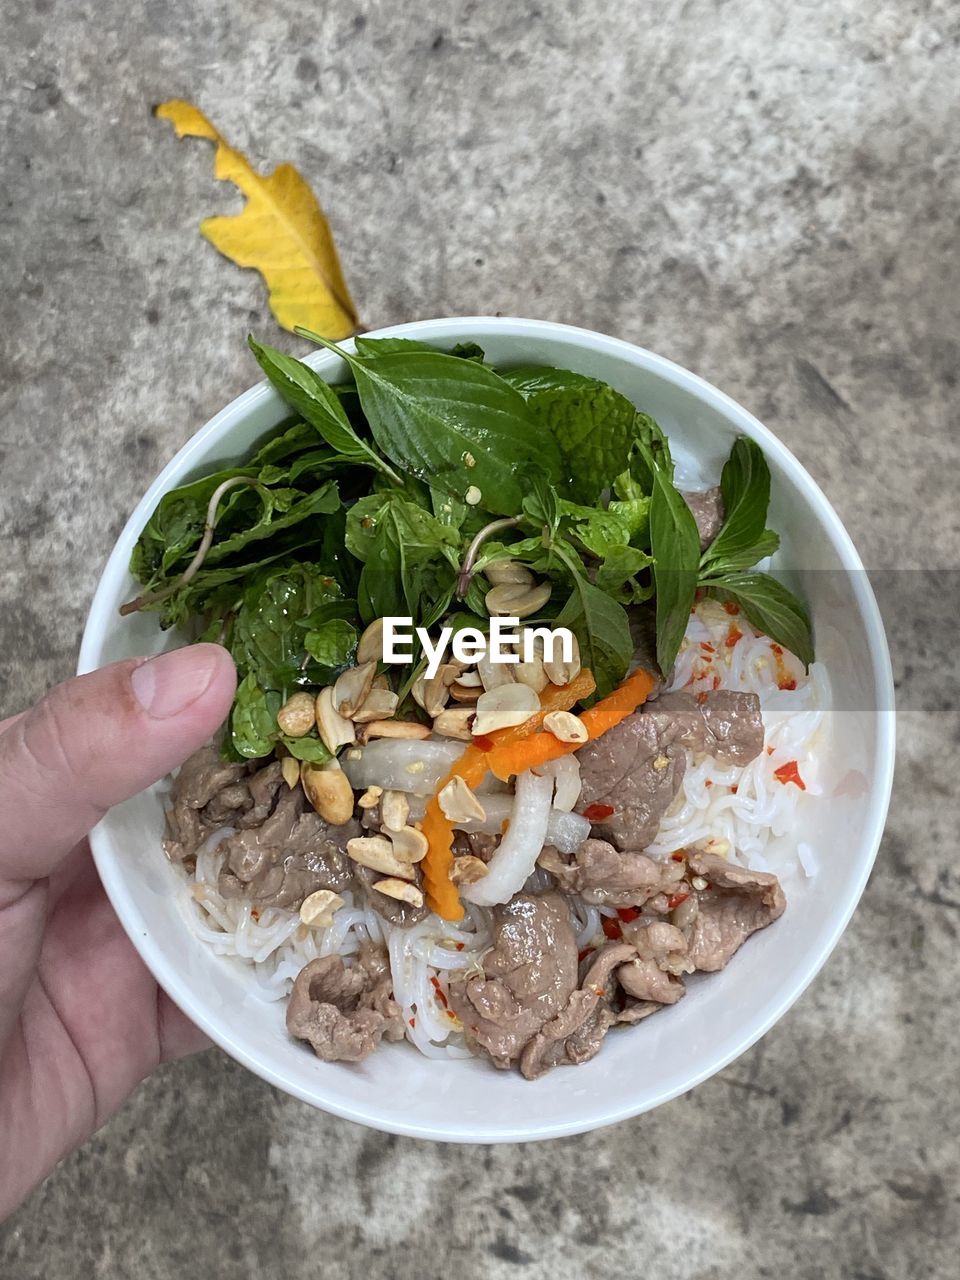 HIGH ANGLE VIEW OF HAND HOLDING BOWL OF FOOD